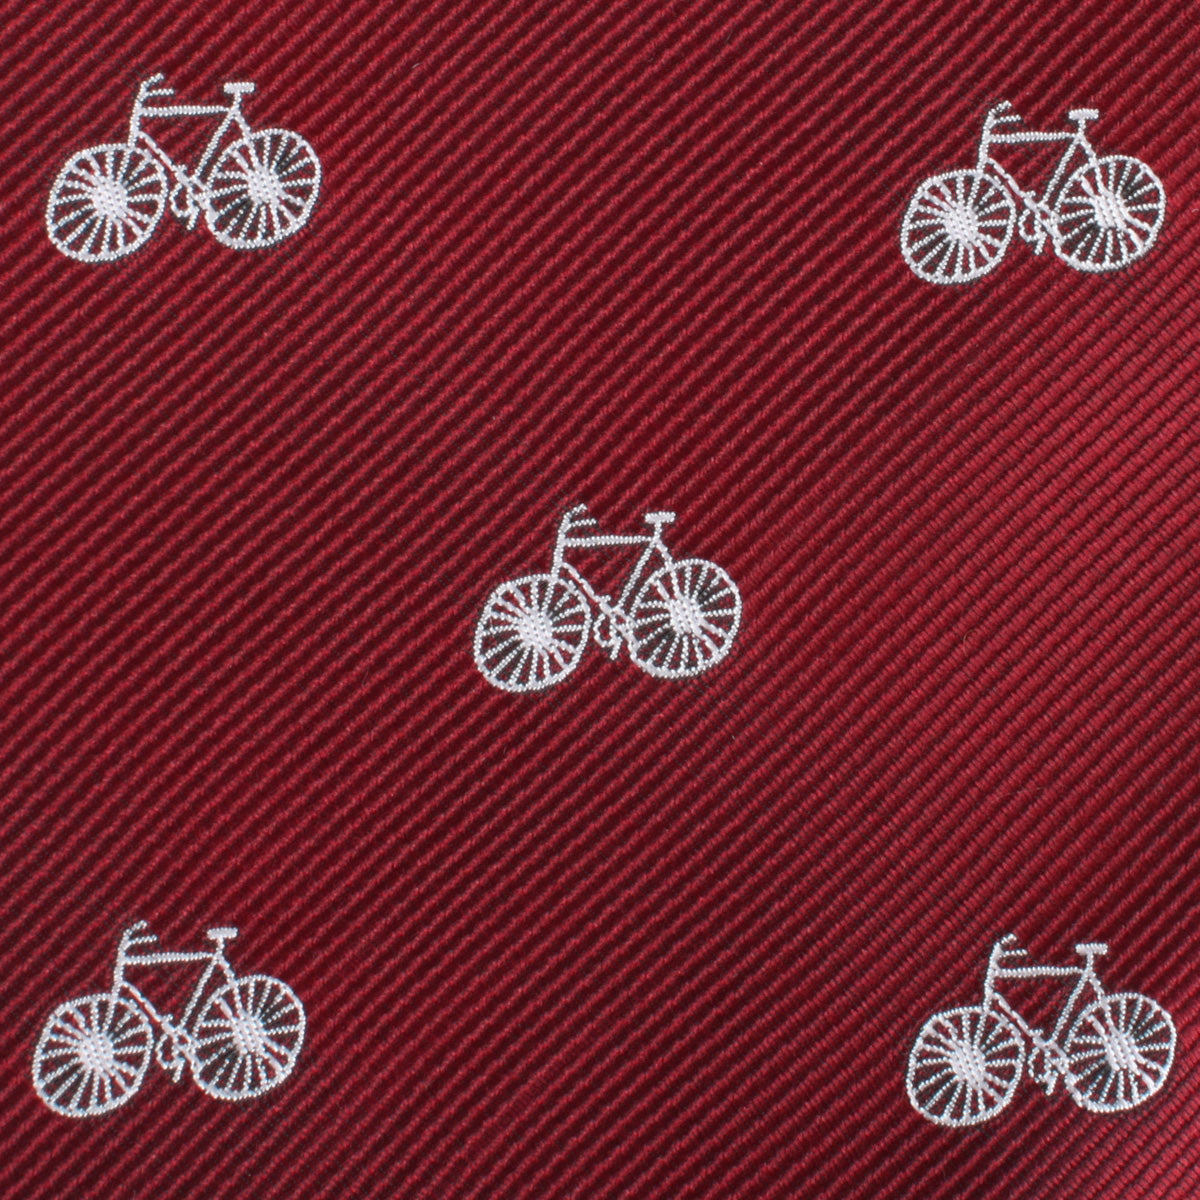 Burgundy French Bicycle Necktie Fabric